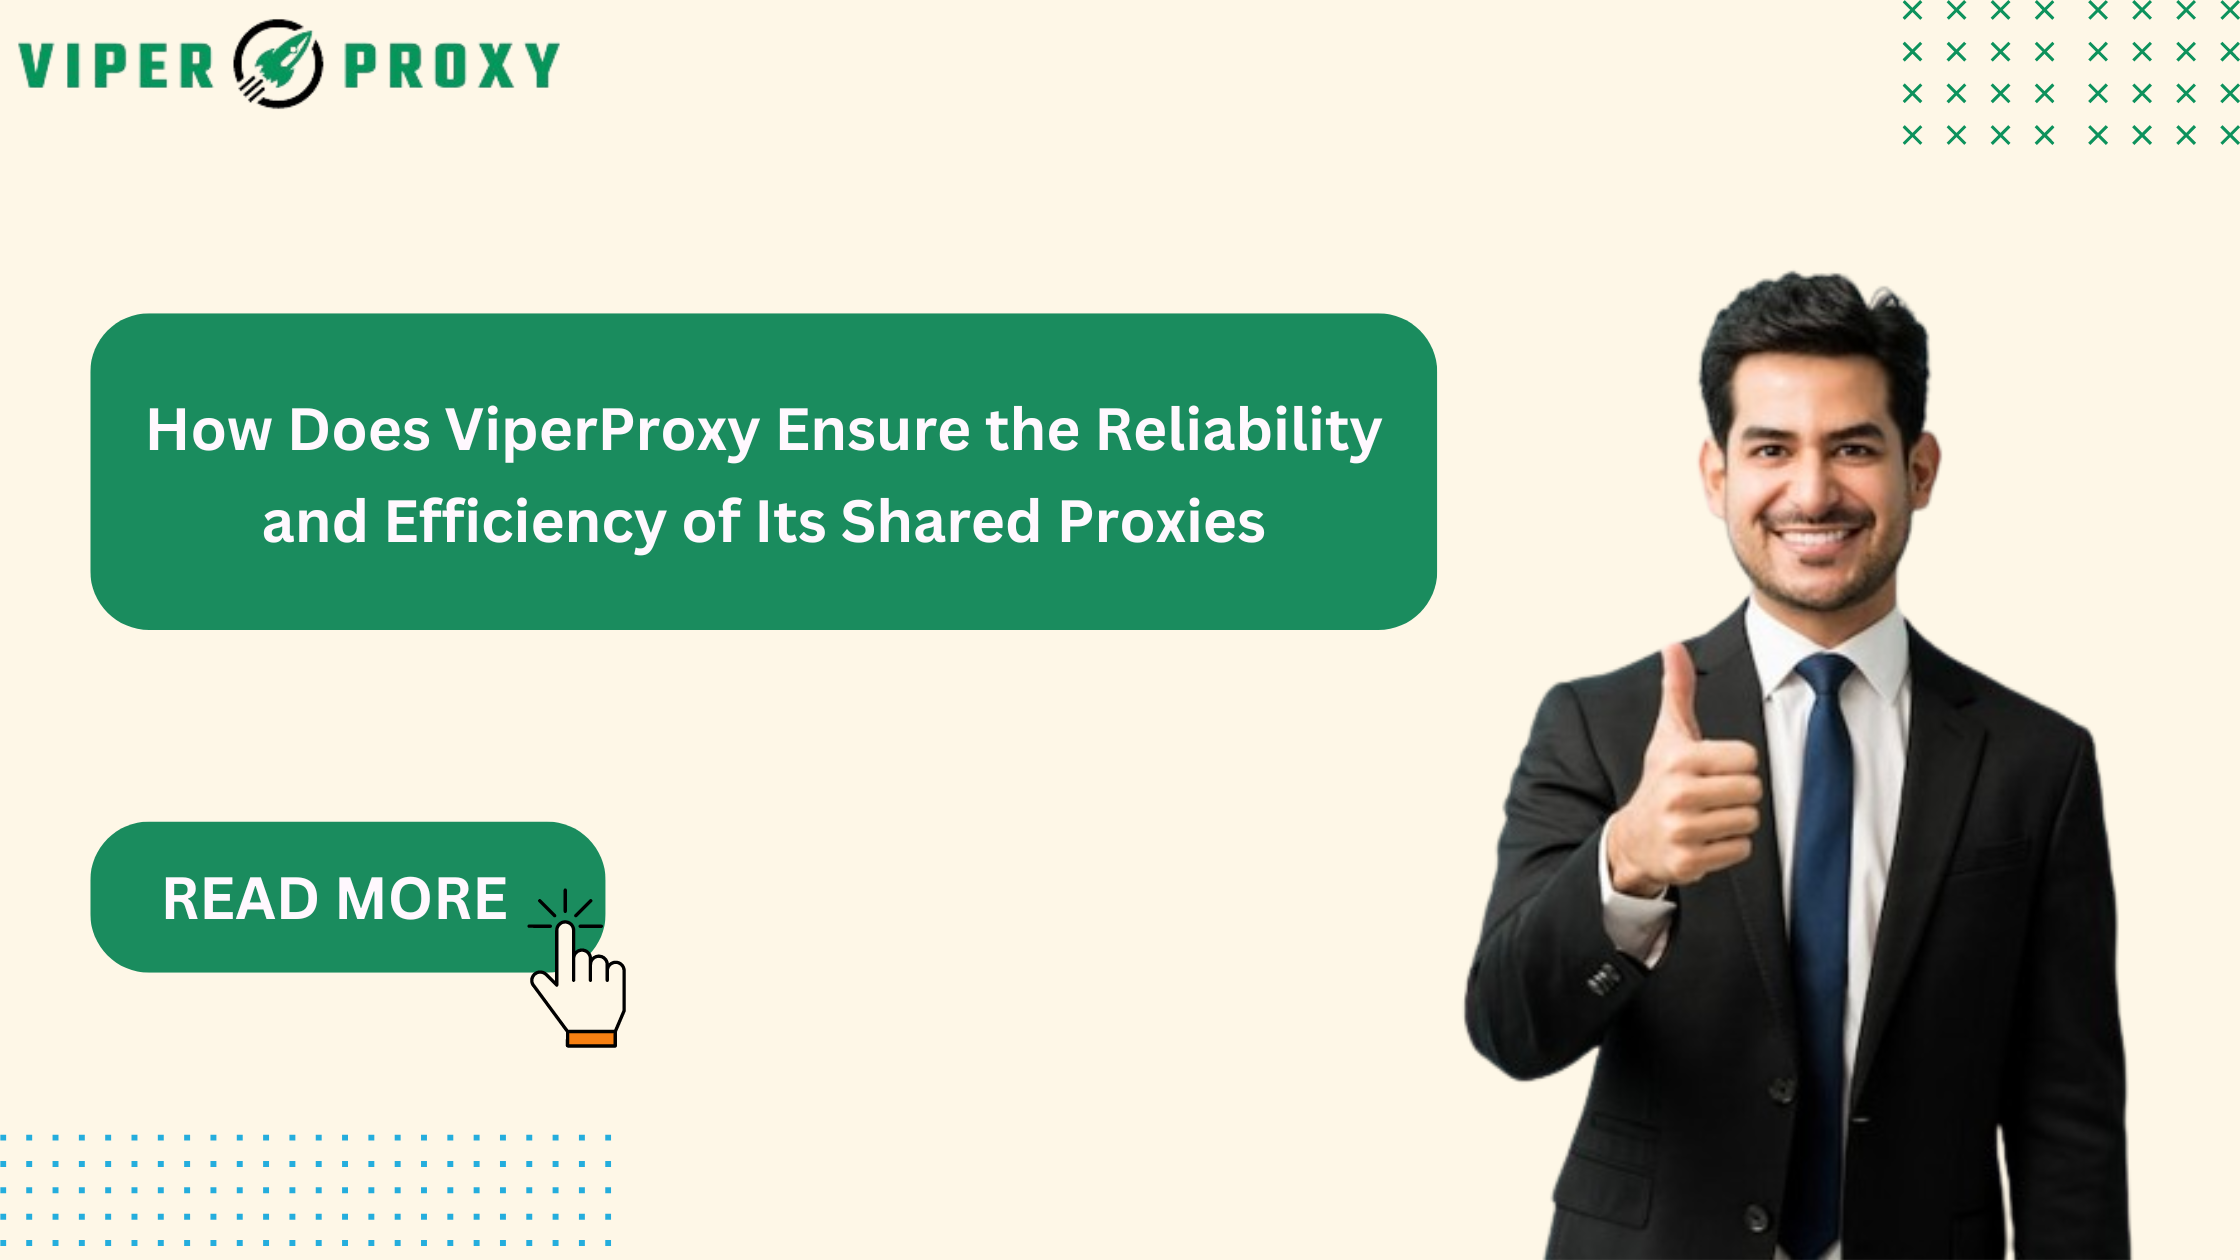 How Does ViperProxy Ensure the Reliability and Efficiency of Its Shared Proxies